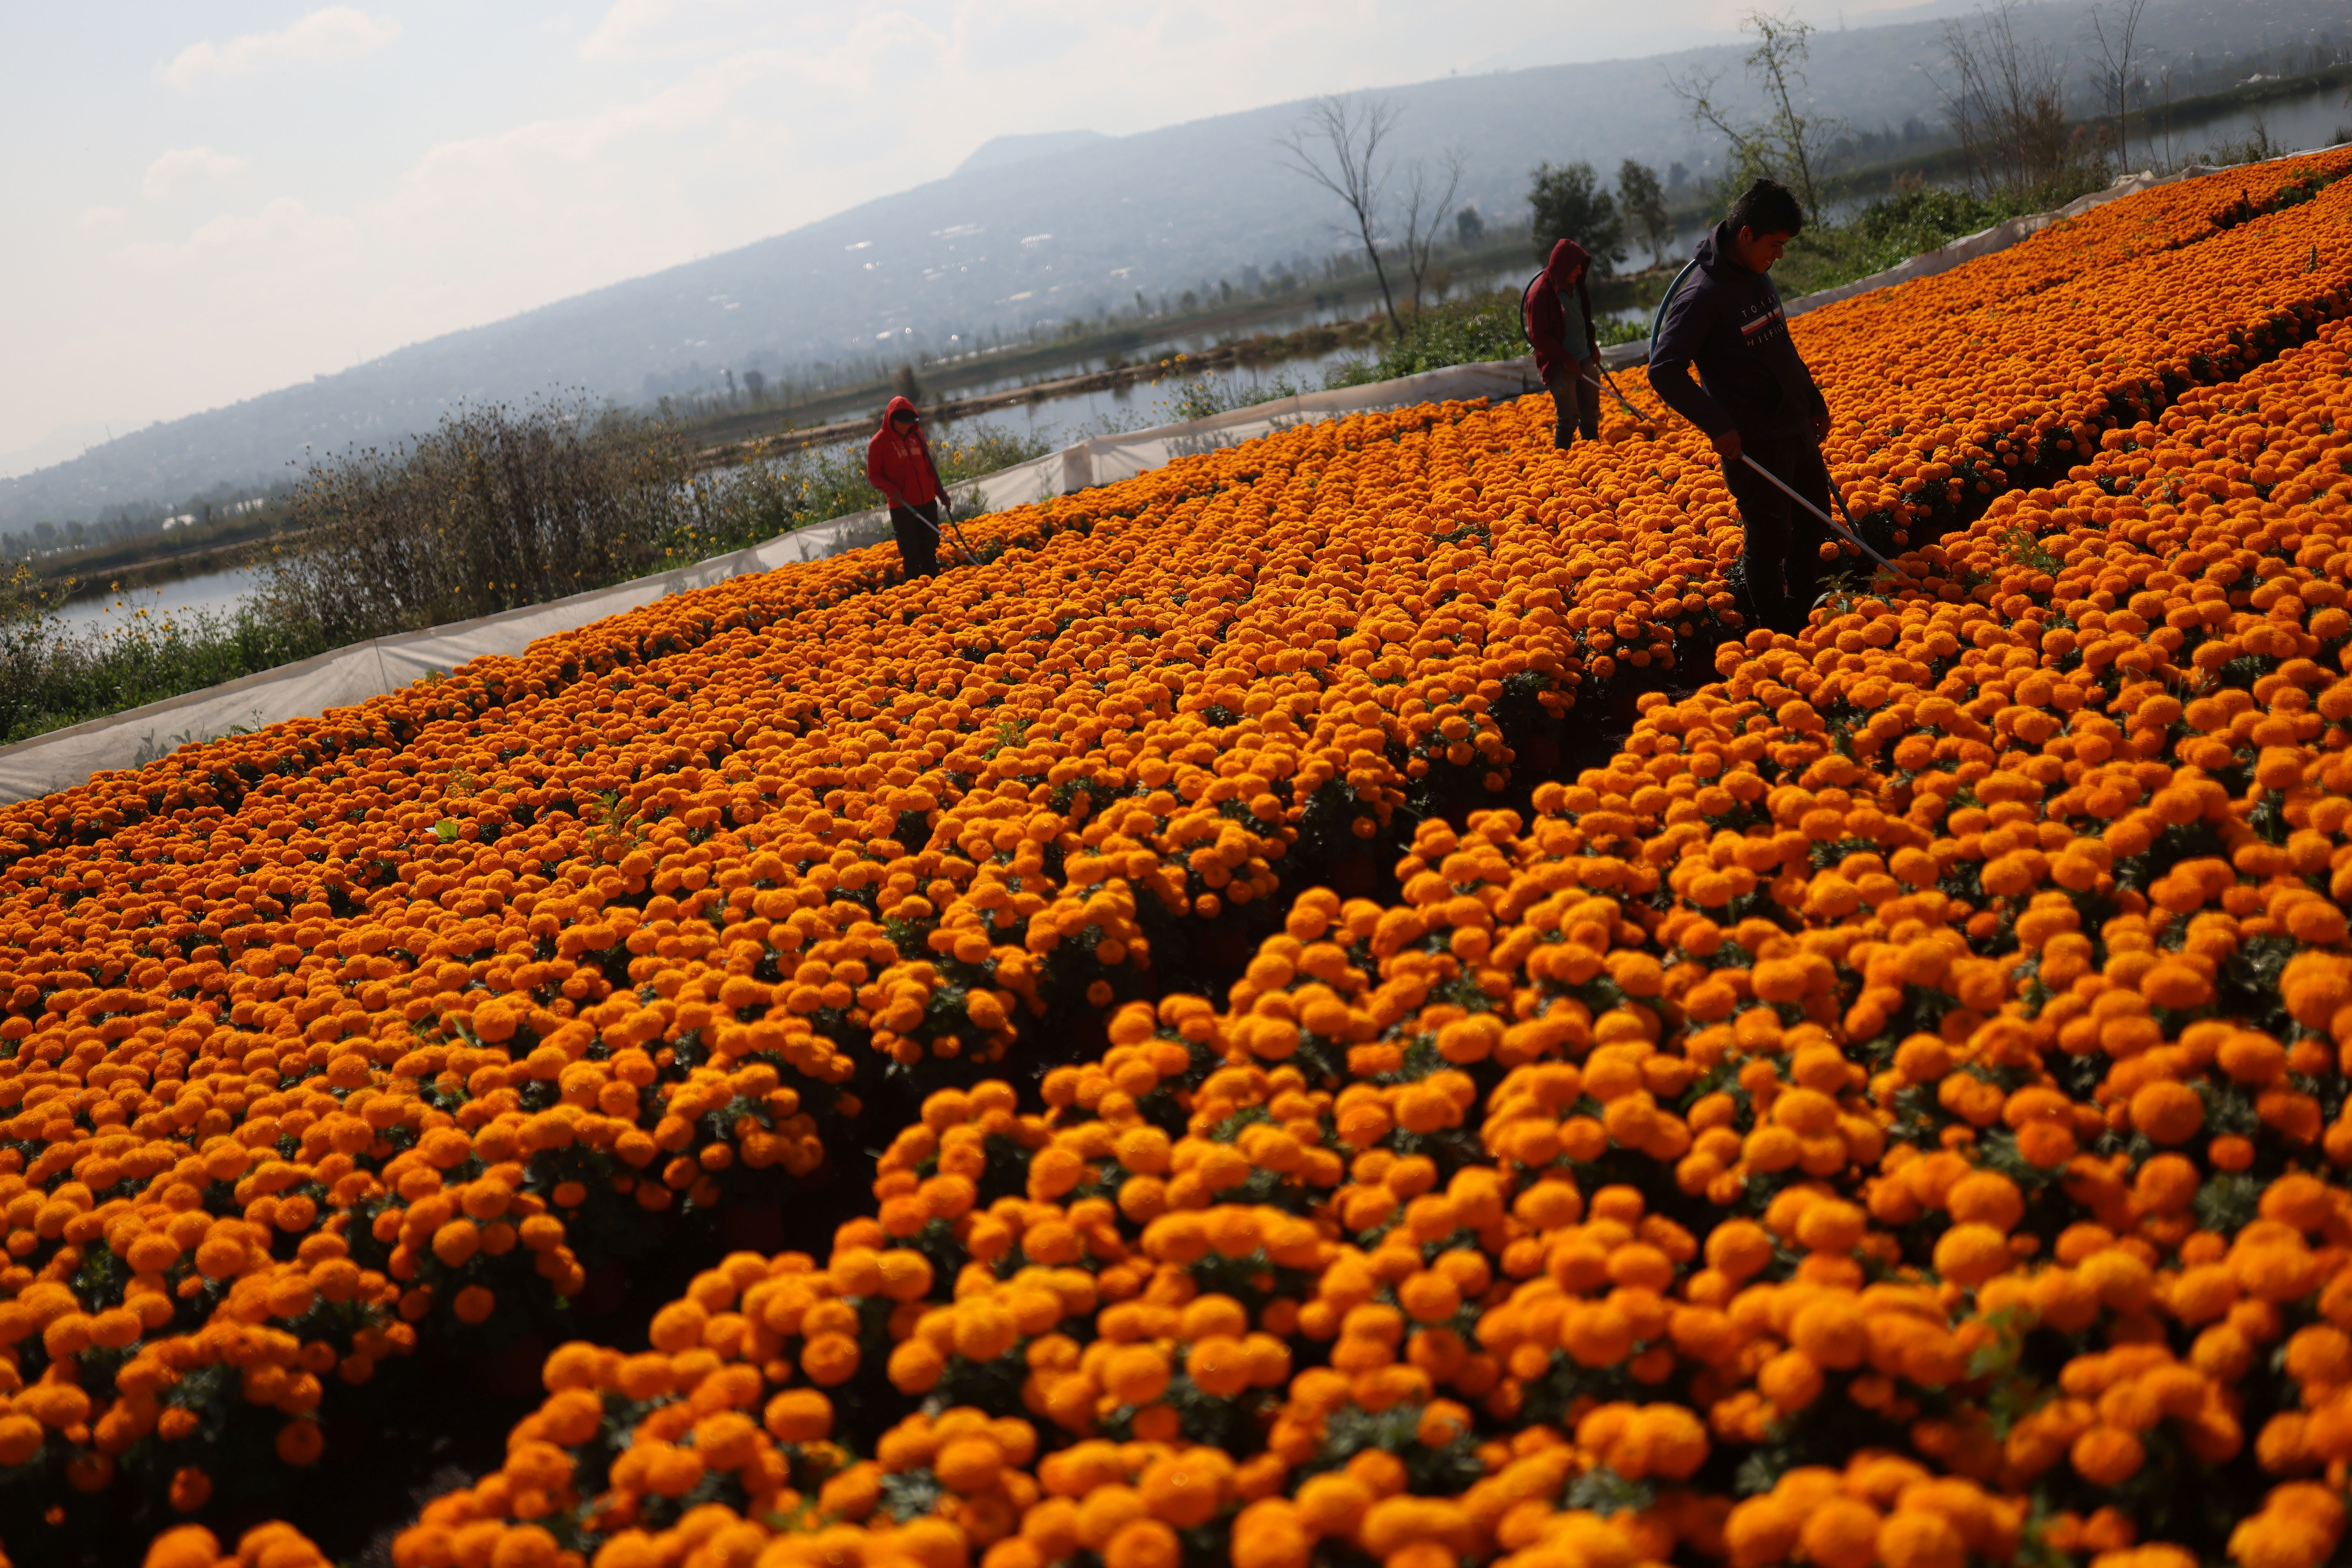 Workers water Cempasuchil Marigolds to be used during Mexico's Day of the Dead celebrations at San Luis Tlaxialtemalco nursery, in Xochimilco on the outskirts of Mexico City, Mexico October 28, 2021. REUTERS/Edgard Garrido